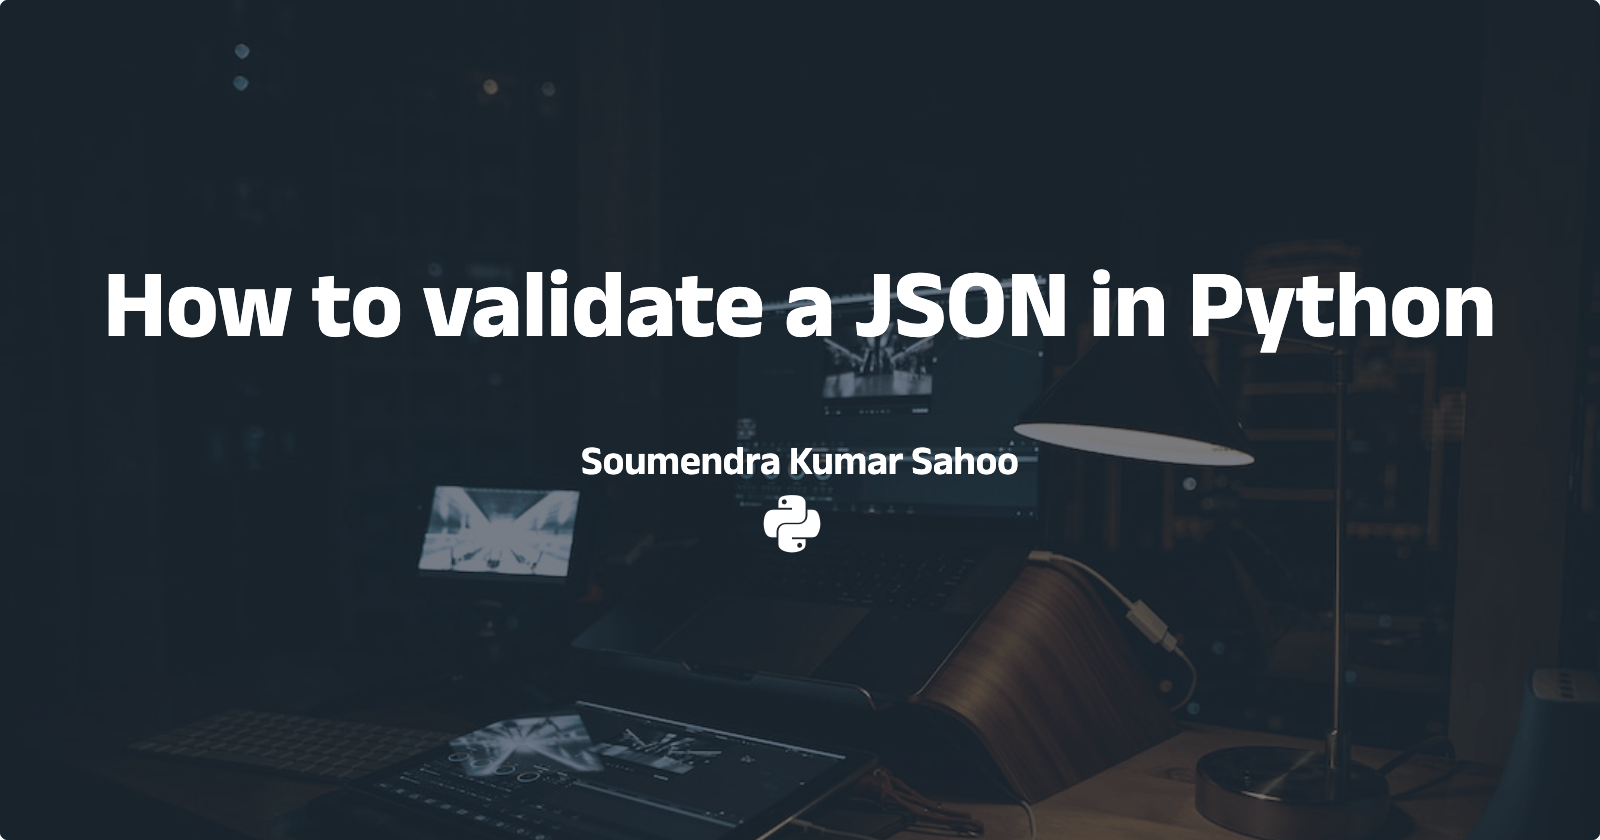 How to validate a JSON in Python